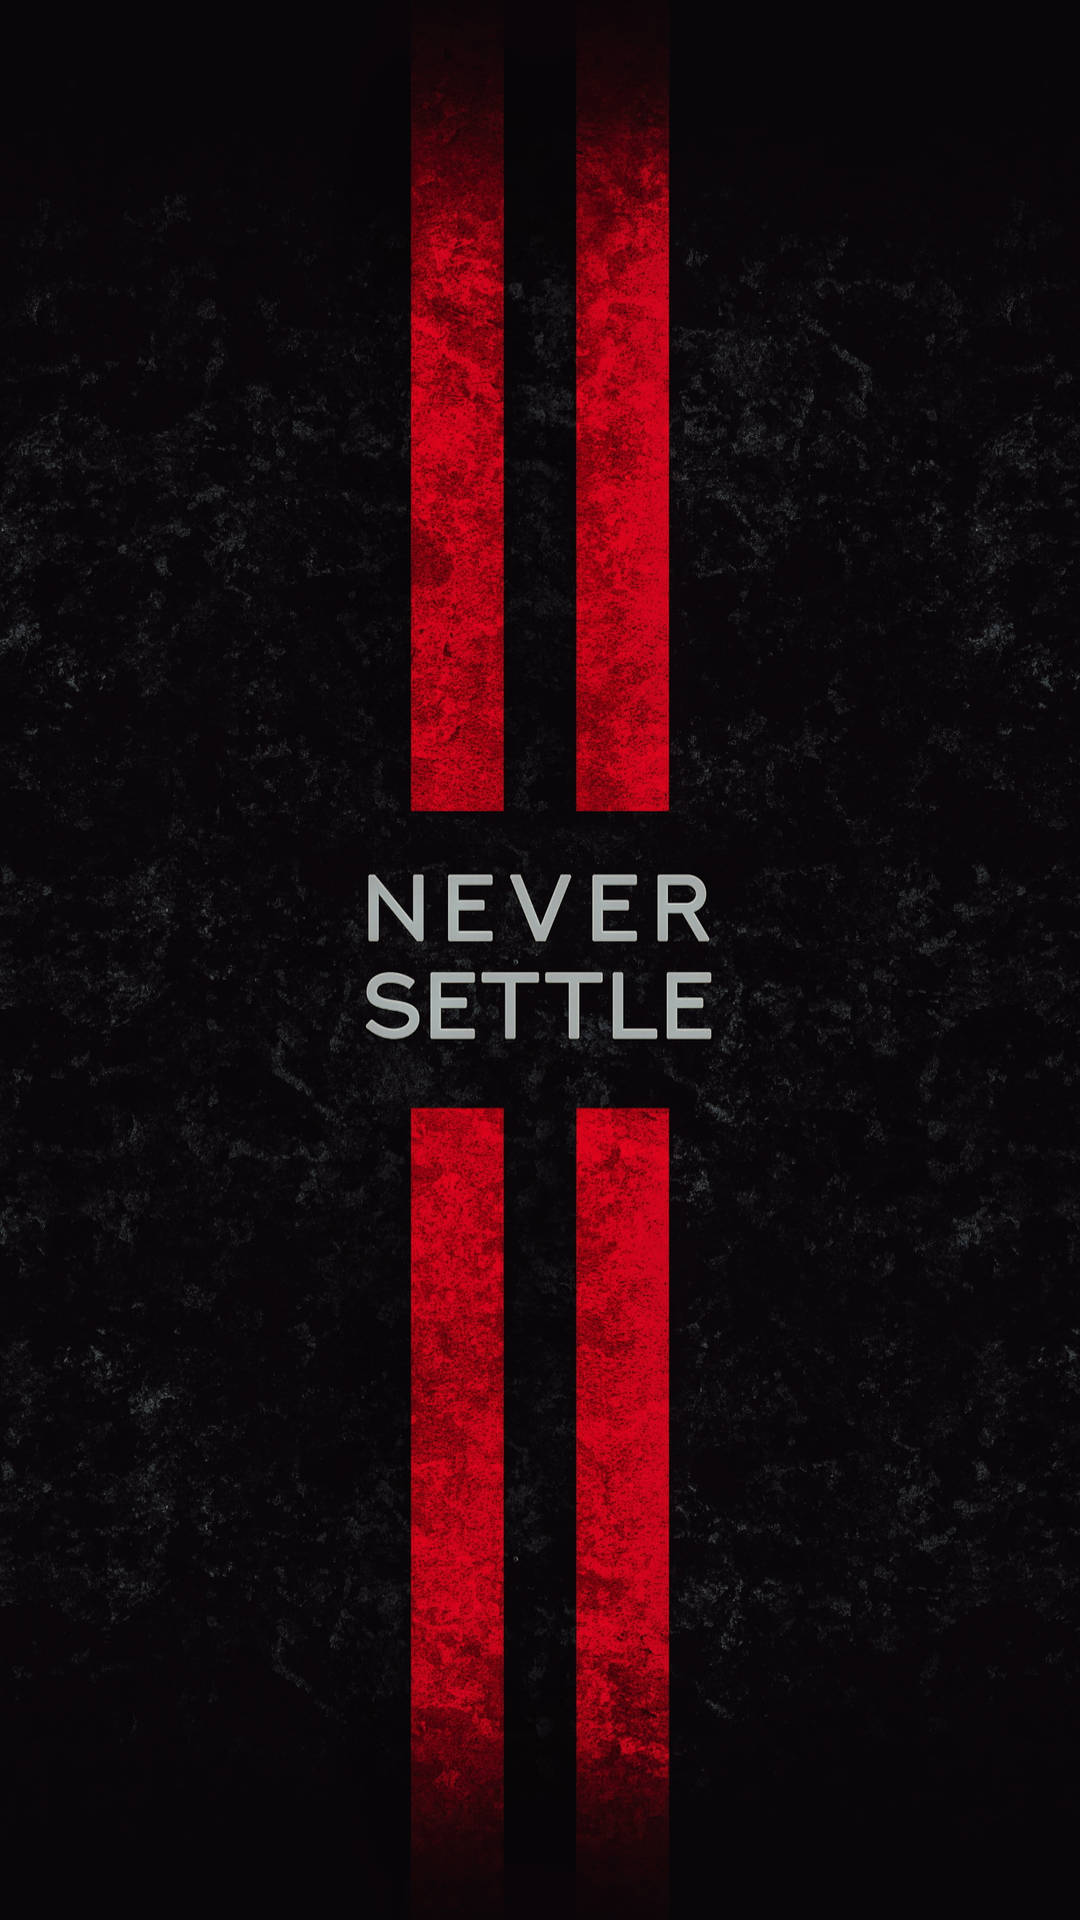 Never Settle: My Focuses for the Rest of 2022